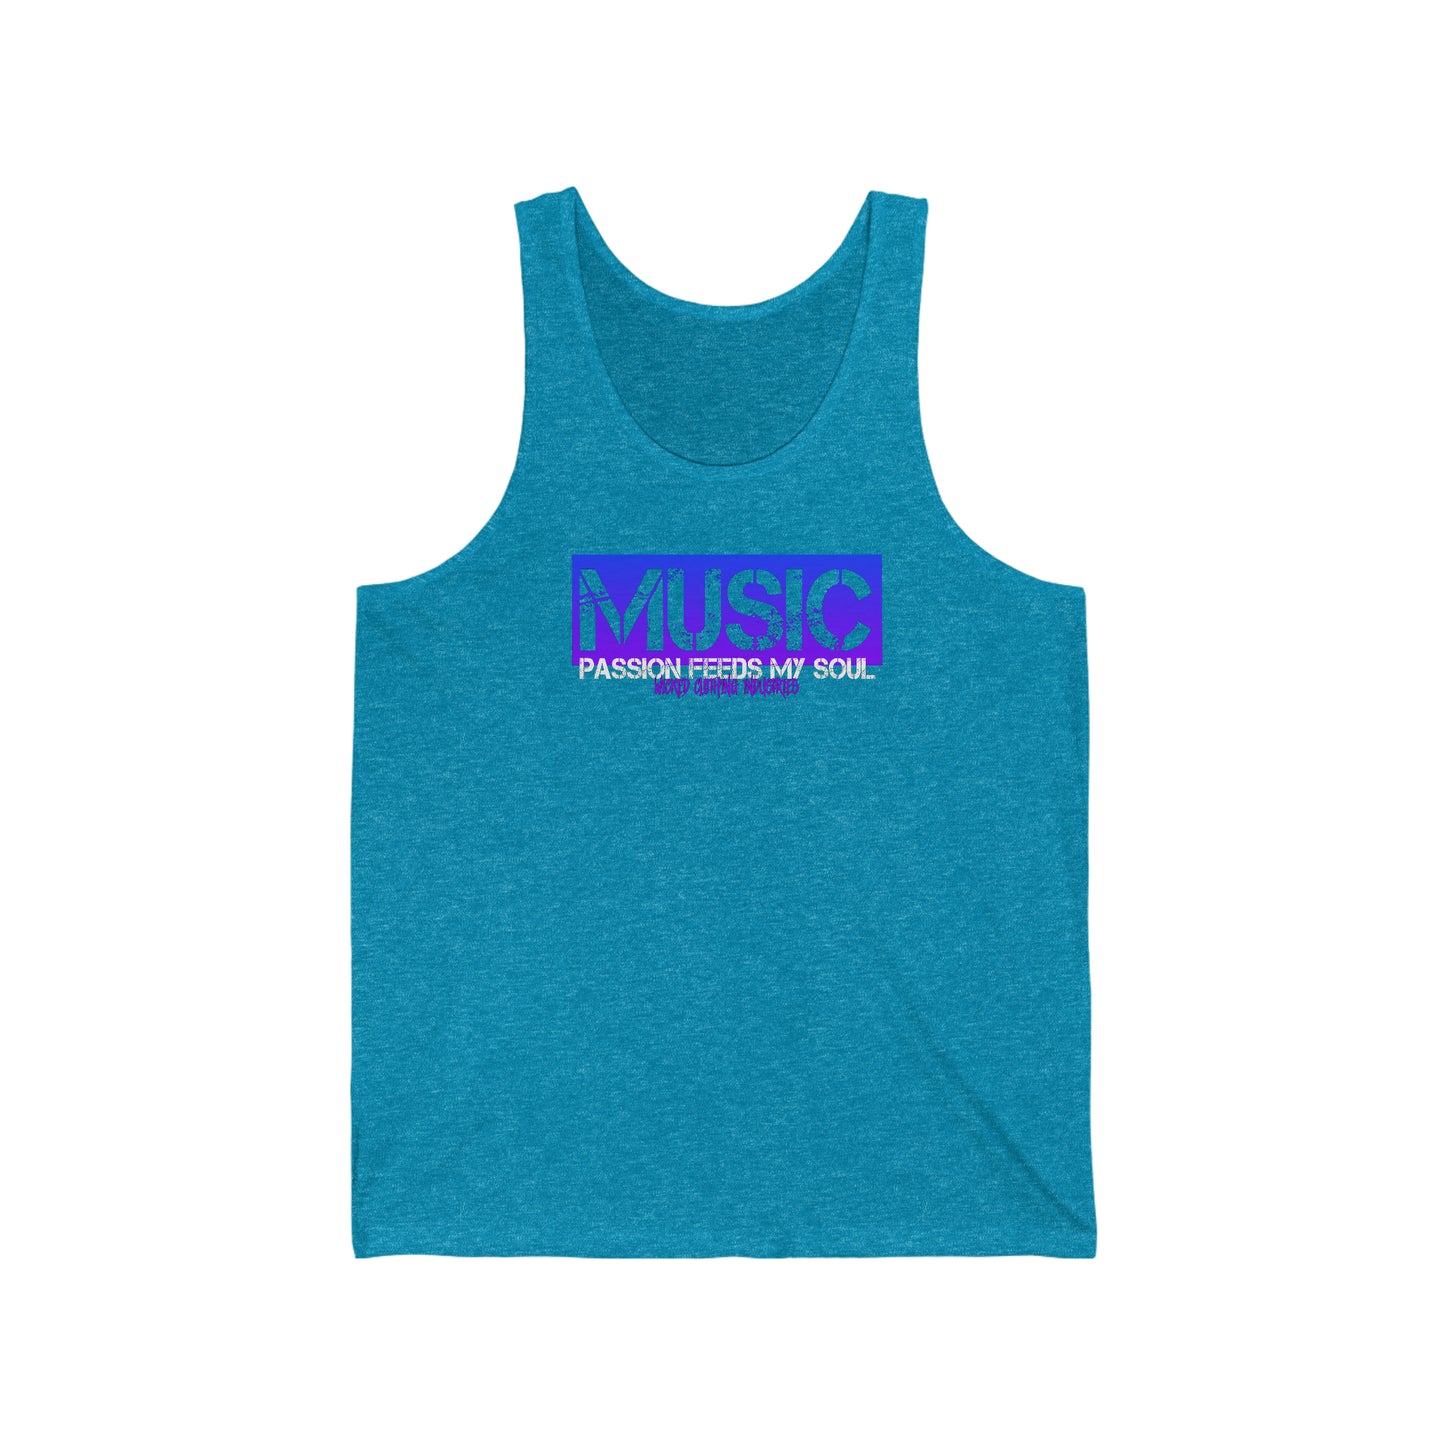 Music Passion Feeds My Soul Tank Top